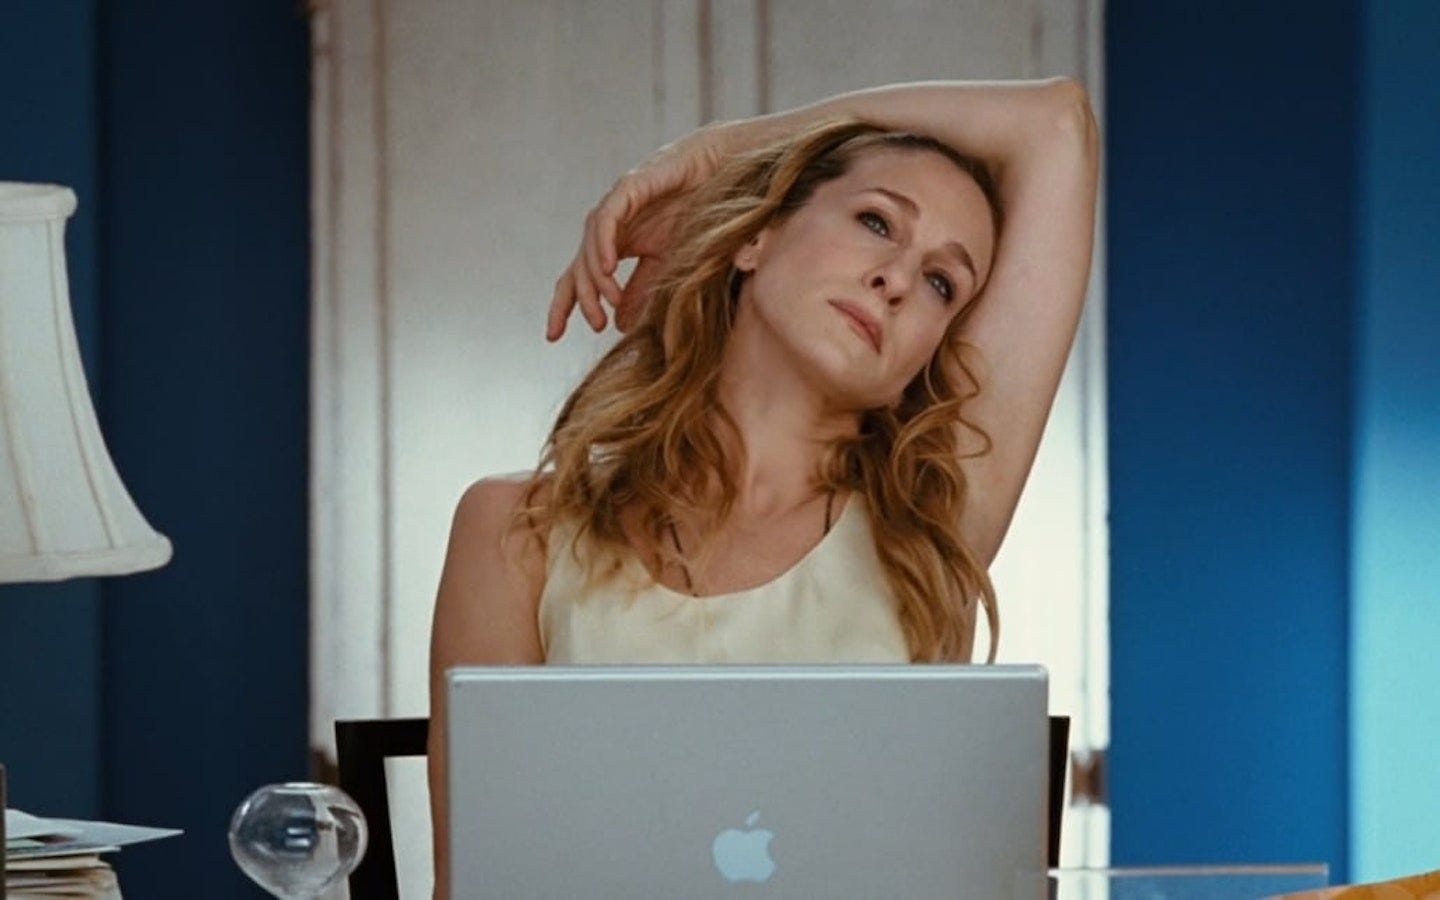 SATC: Carrie Bradshaw's Work From Home Set-Up Is A World Of Pain